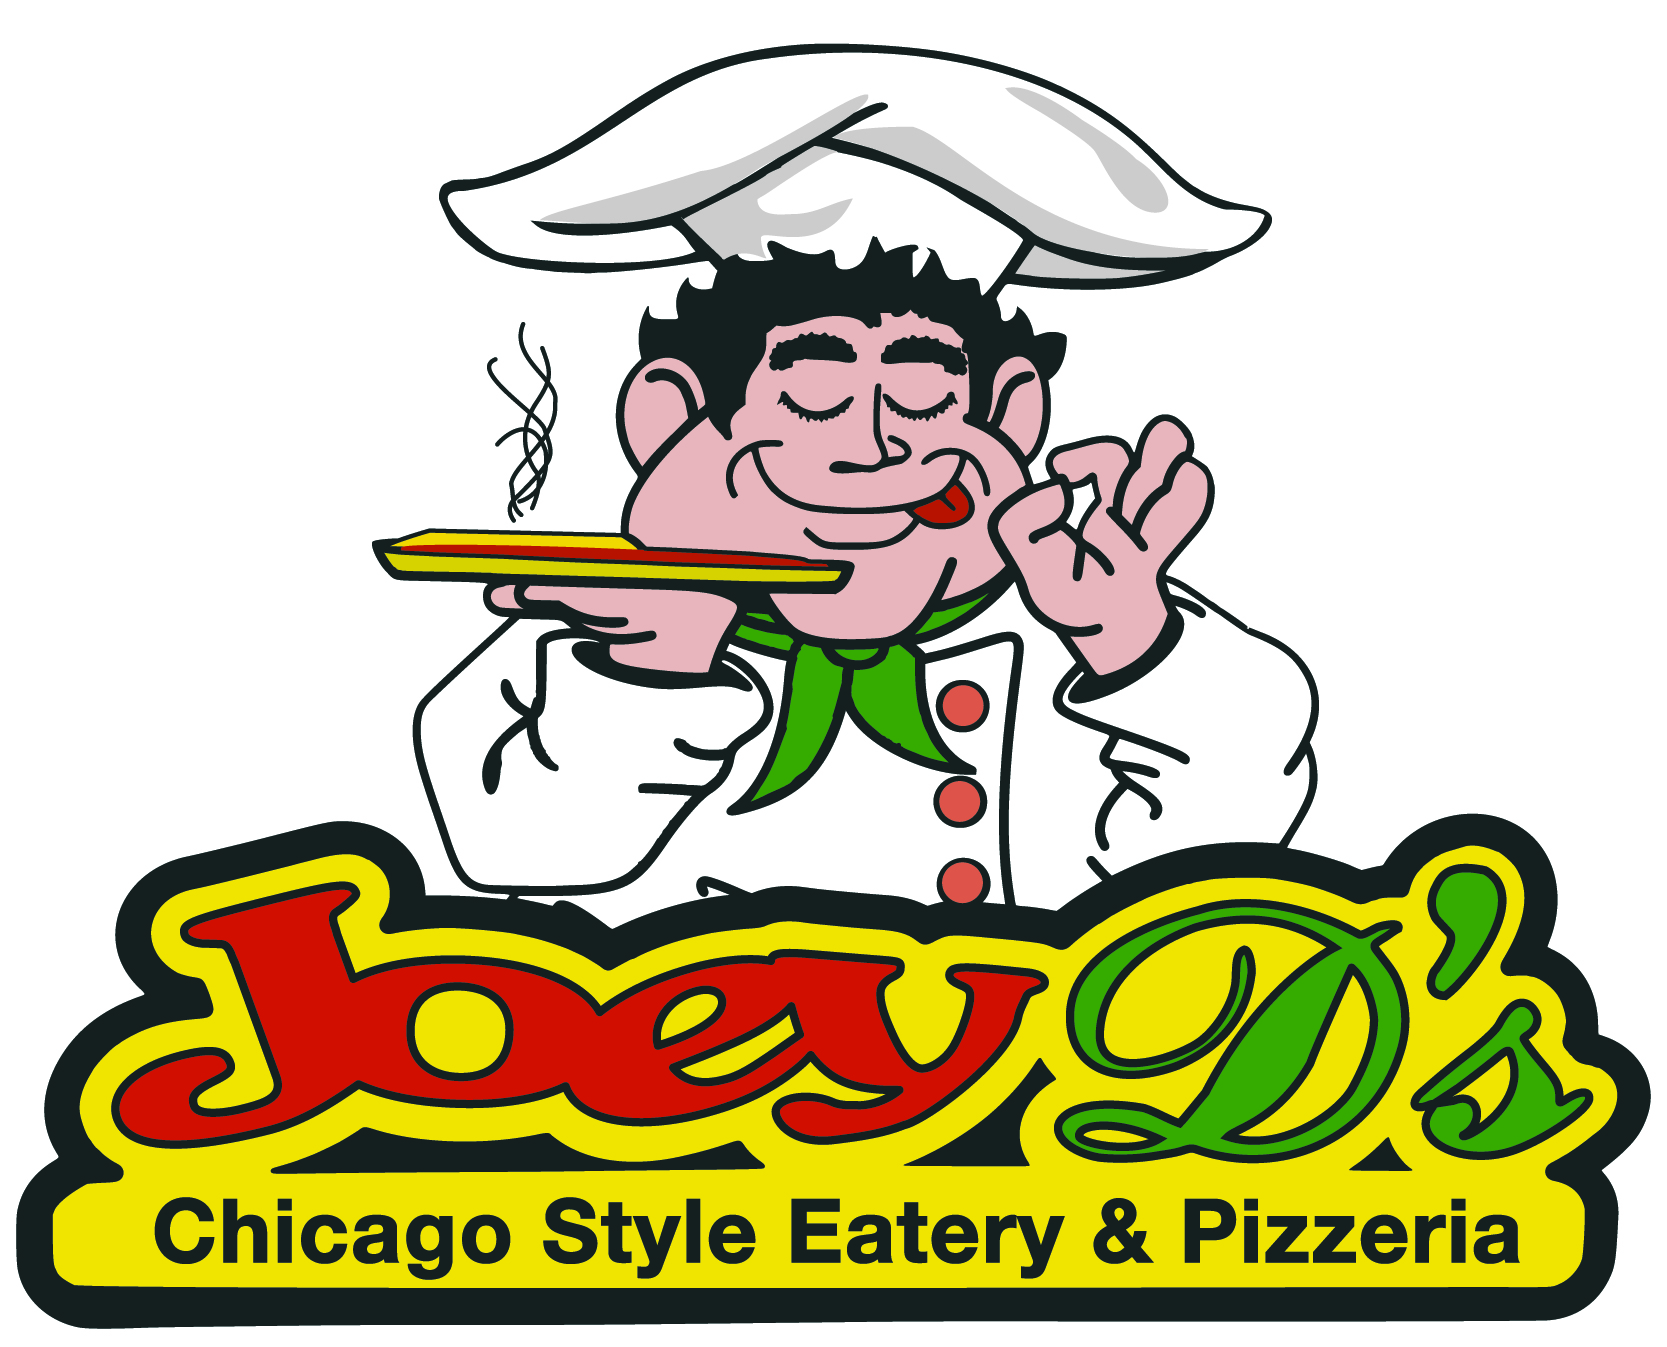 Joey D's Chicago Style Eatery and Pizzeria - Palmetto